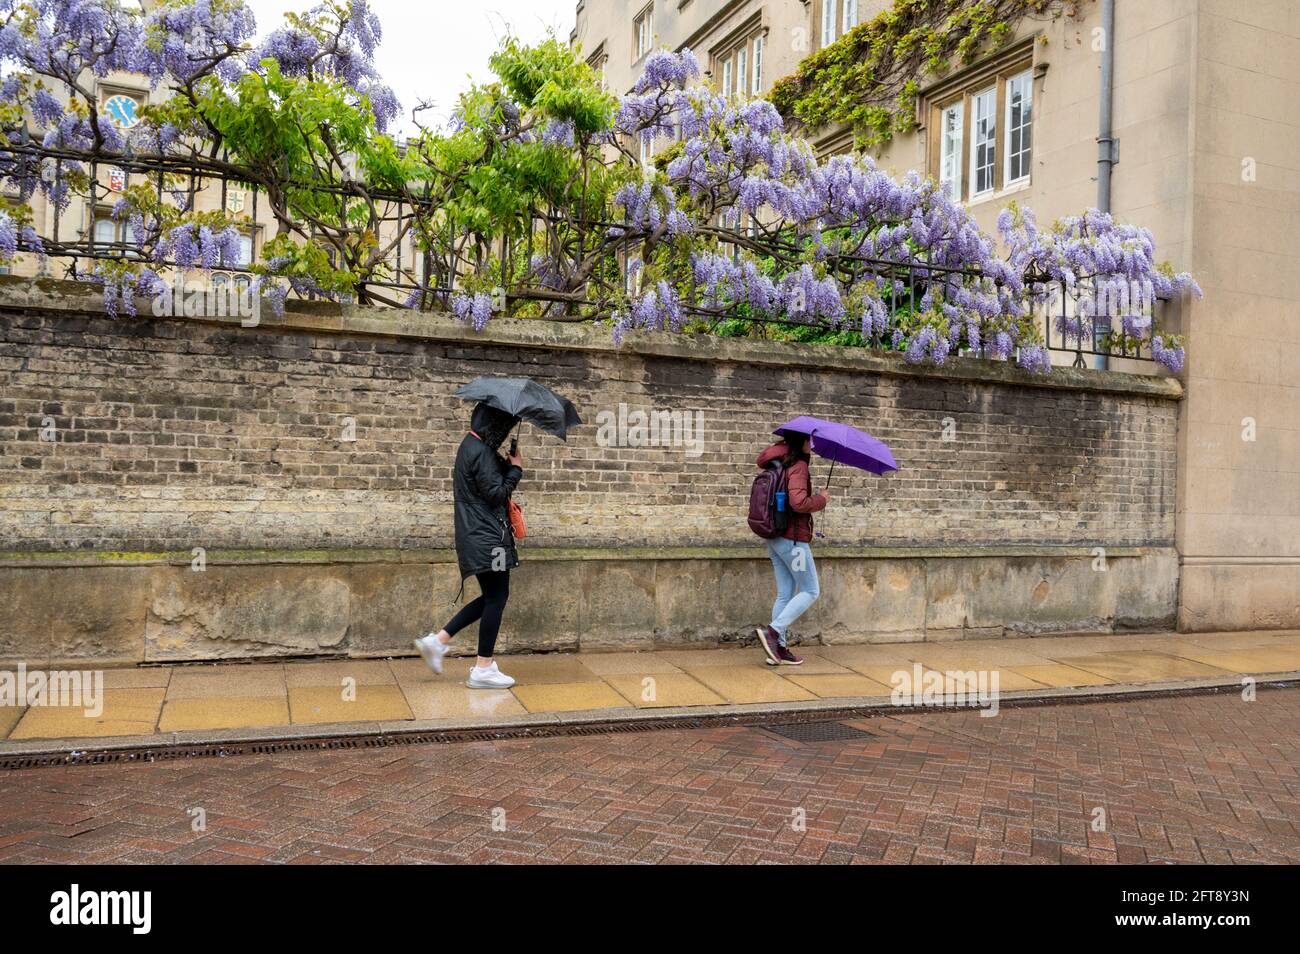 Cambridge, UK. 21st May, 2021. People walk by the wisteria blooming on the walls of Sidney Sussex College with umbrellas and raincoats. The late spring flowers are out in unseasonably wet and cold conditions as the UK weather continues to be unsettled for the time of year. Credit: Julian Eales/Alamy Live News Stock Photo